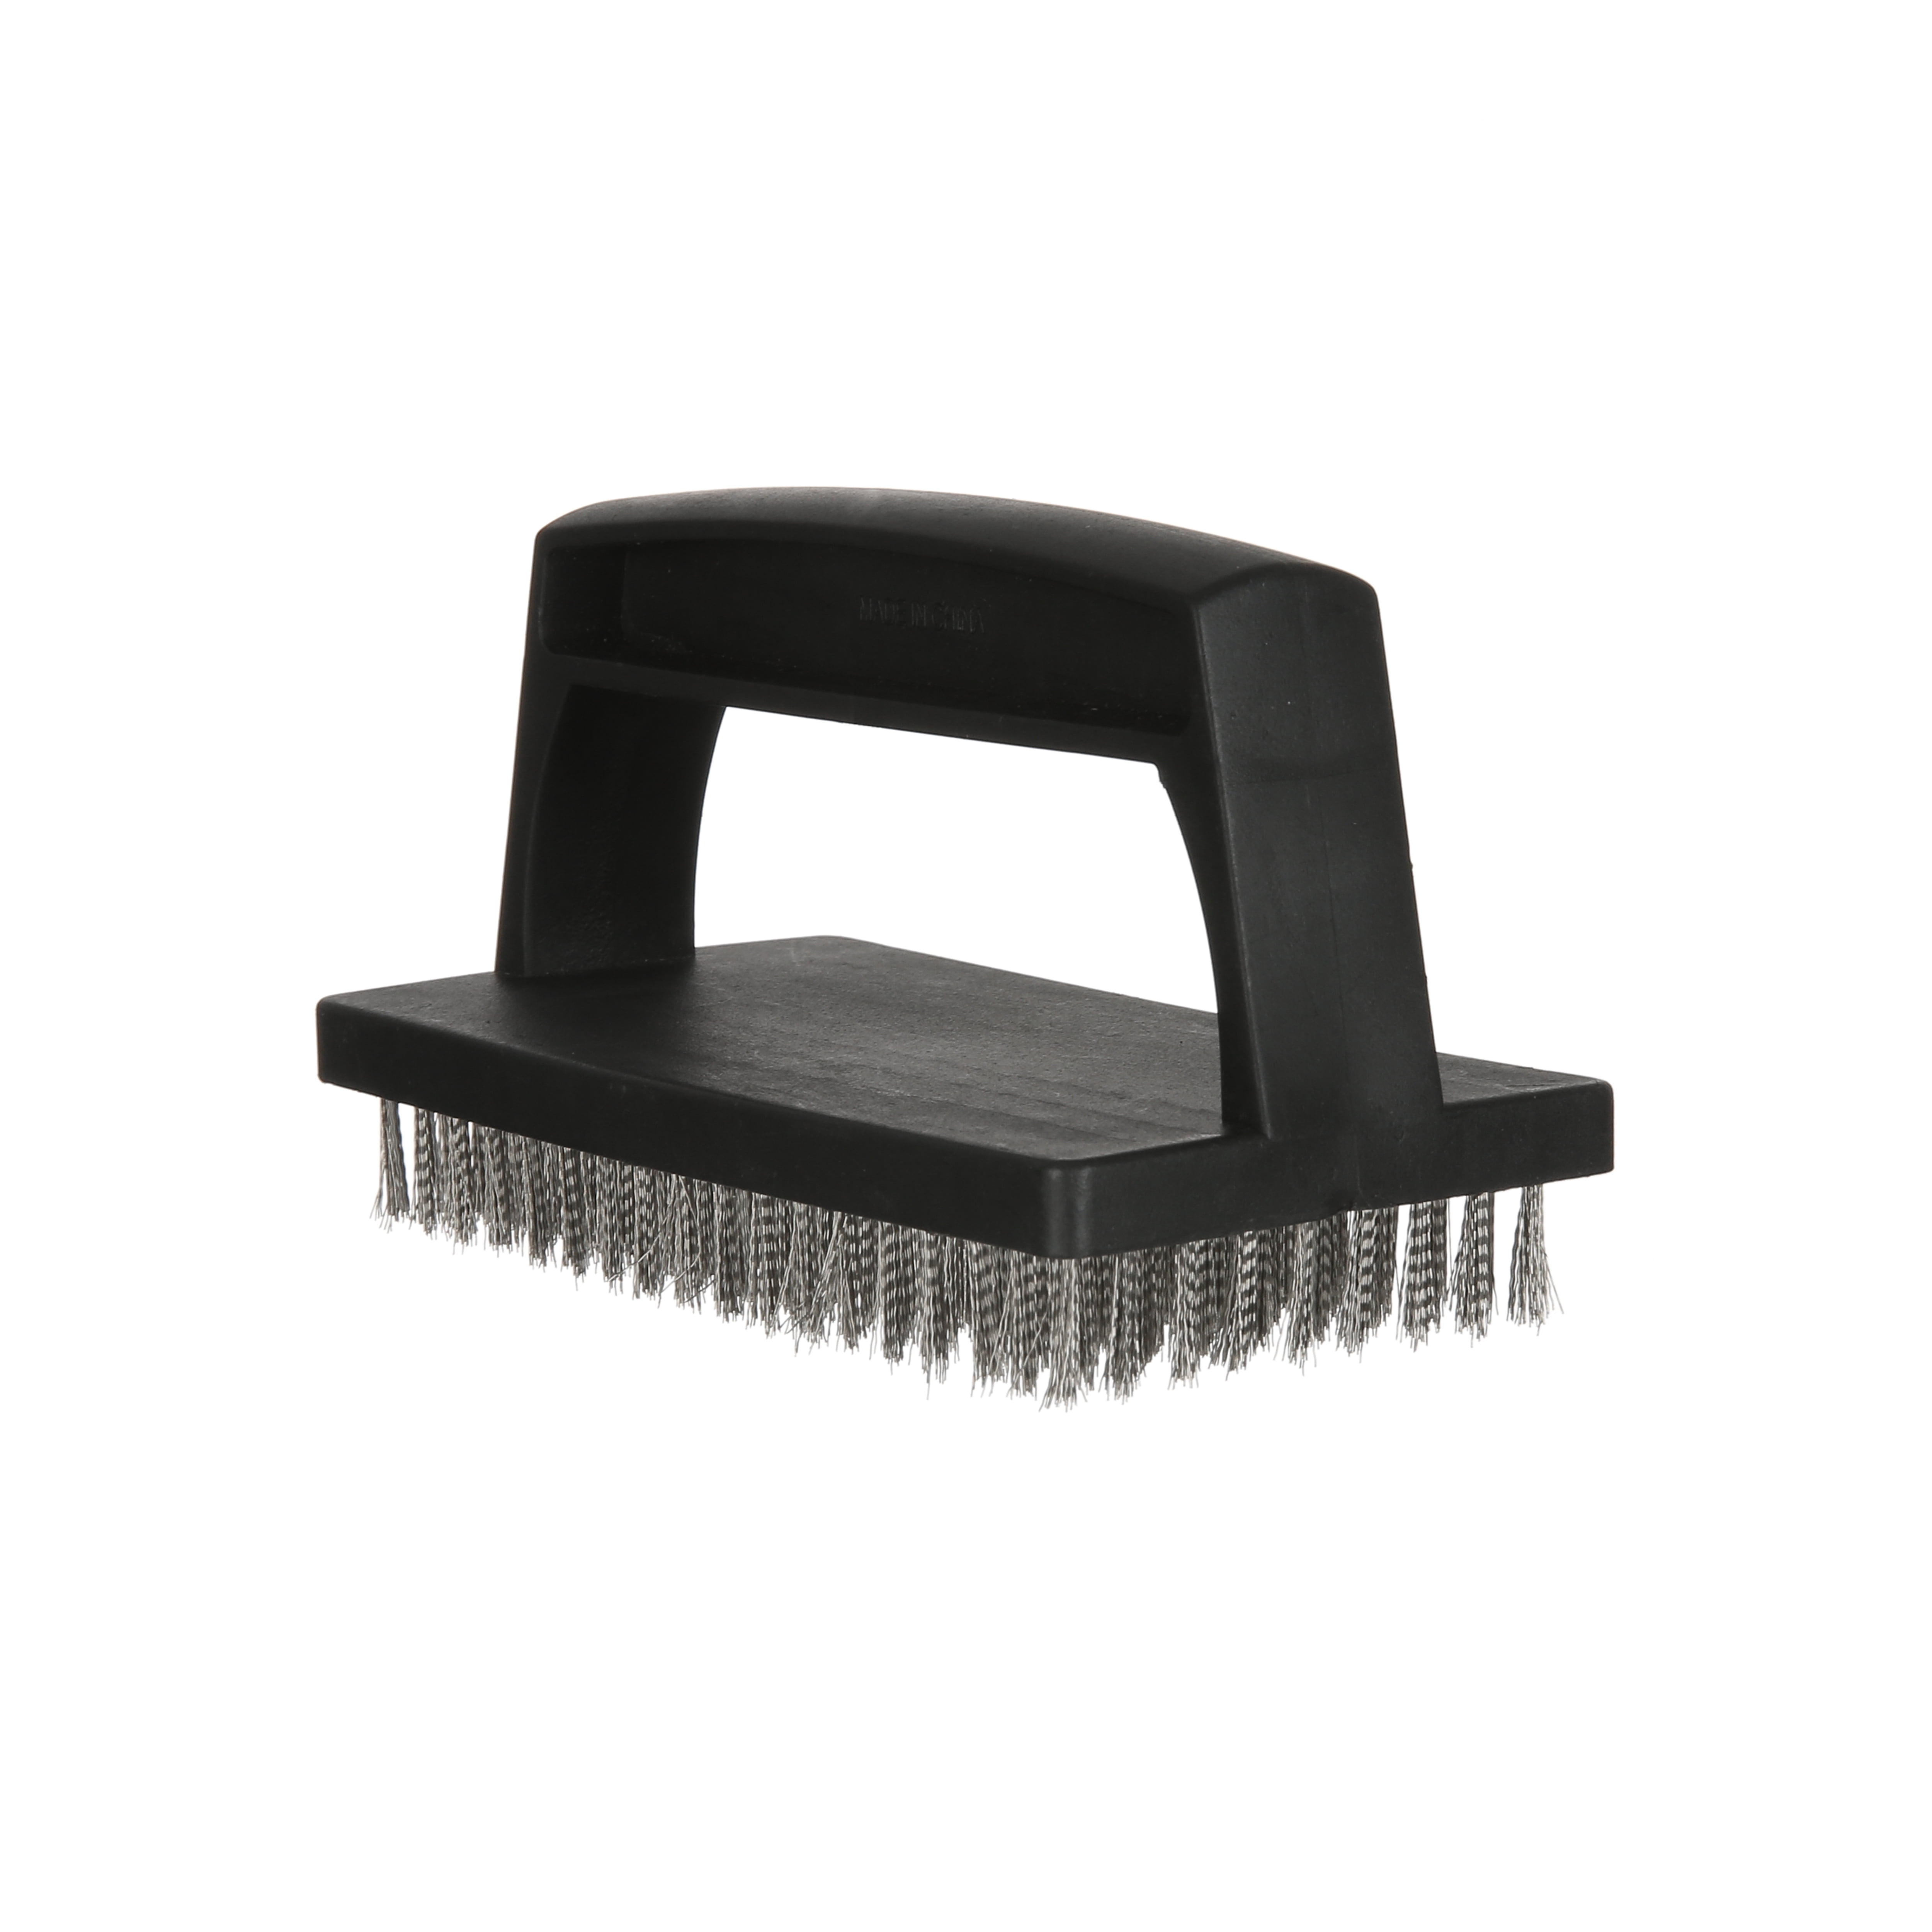 Grill Cleaning Brush 3 in 1 Grill Brush grillschaber BBQ Barbecue f244 